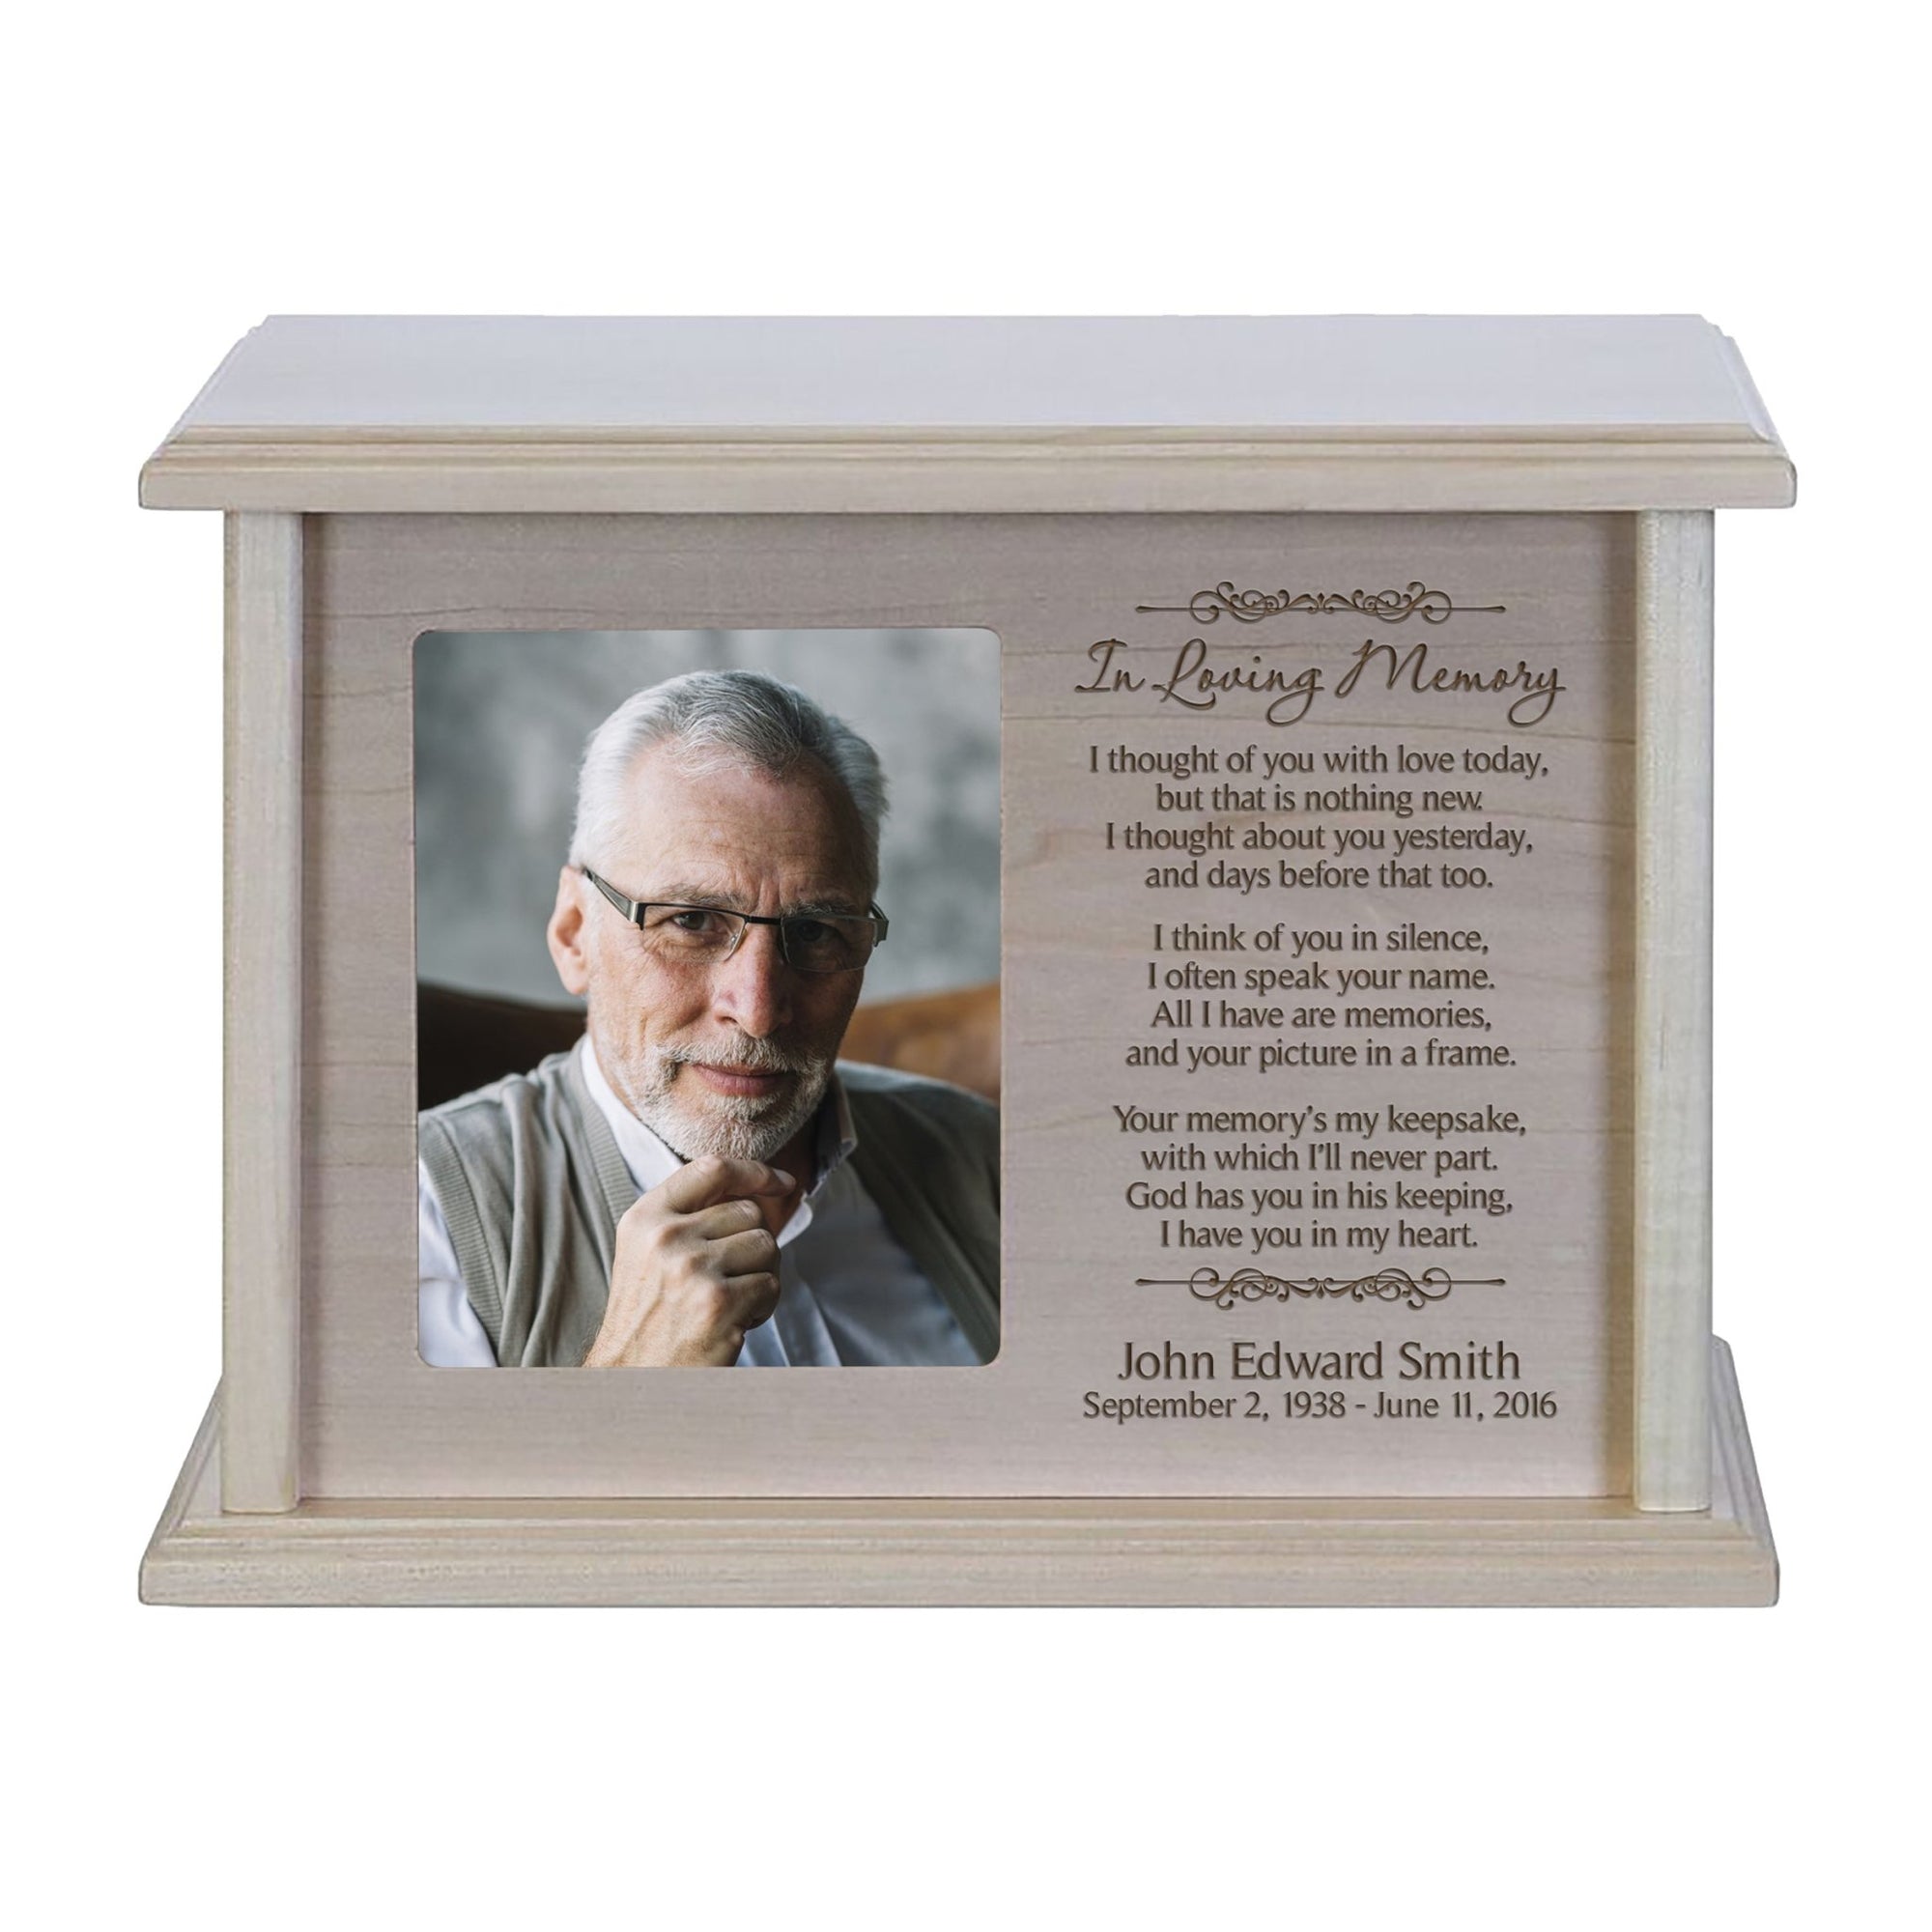 Custom Engraved Memorial Horizontal Keepsake Urn Box Holds 262 Cu Inches Of Human Ashes and 4x5 Picture - In Loving Memory - LifeSong Milestones